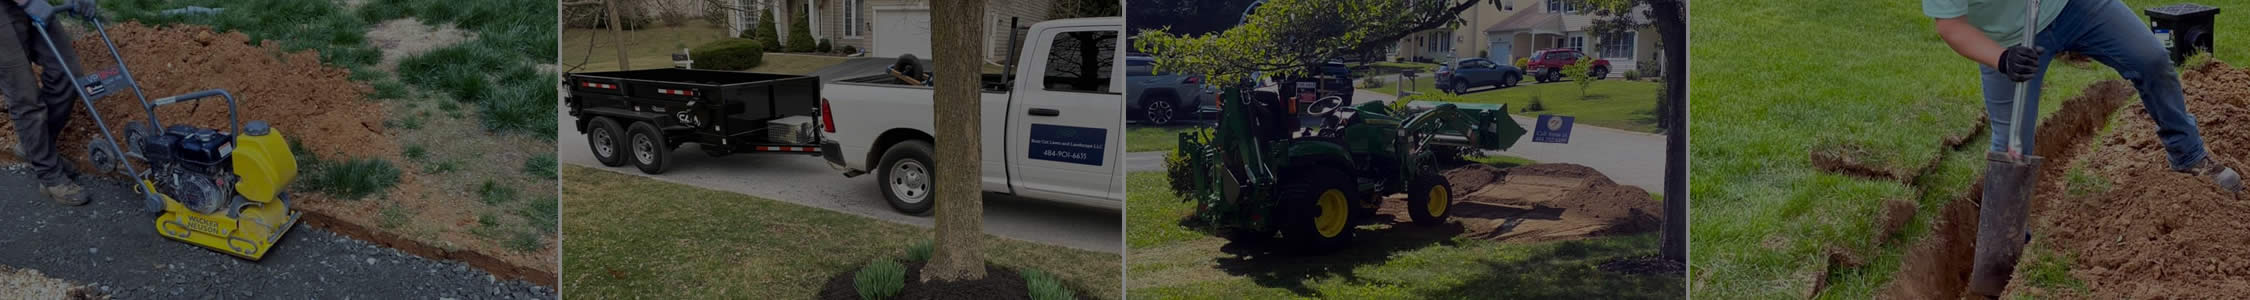 Contact CMG Landscape Company in Chester County PA